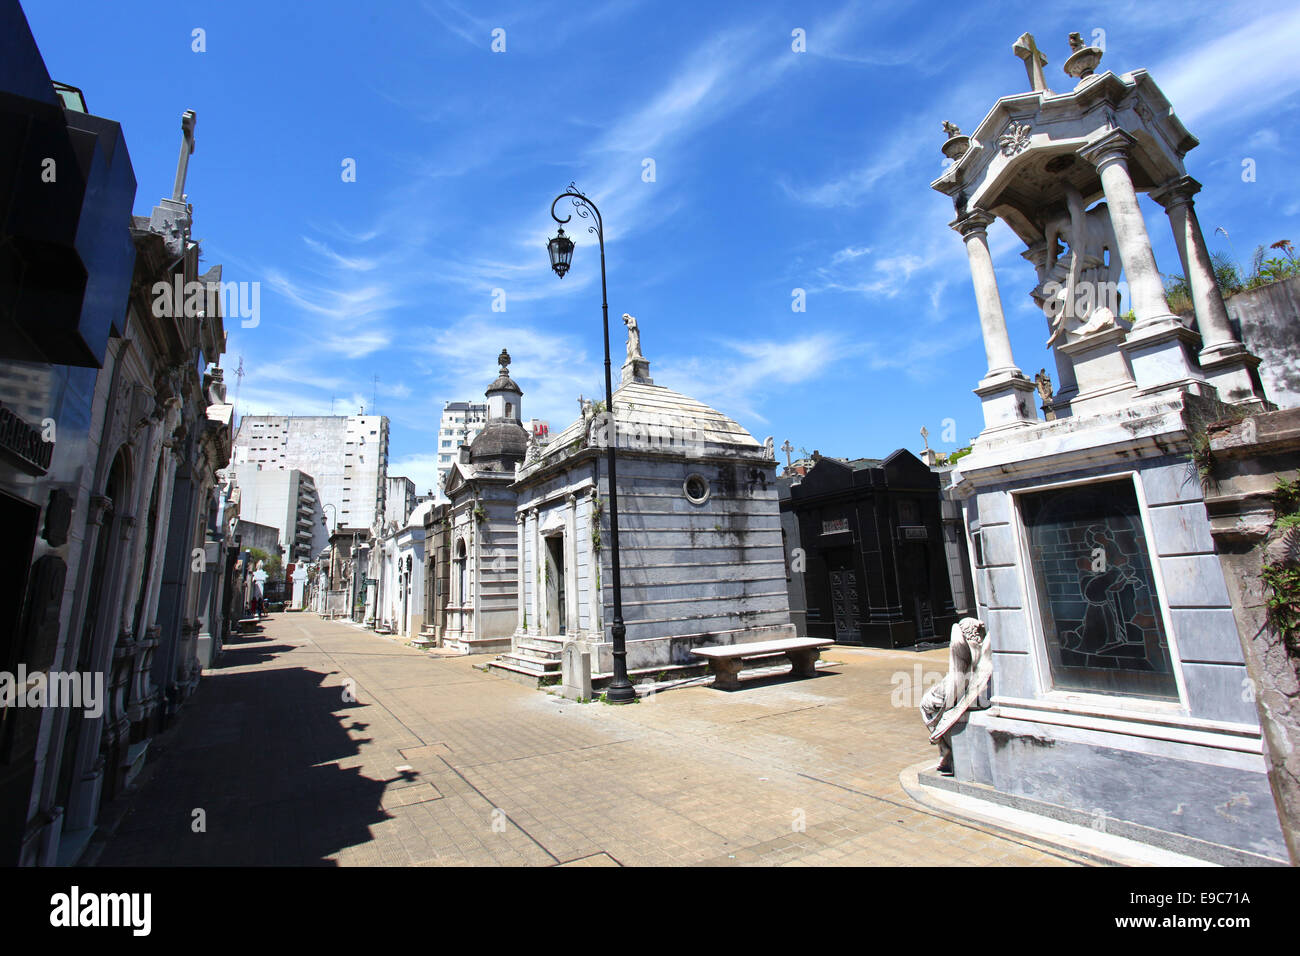 Mausoleums inside the Recoleta monumental cemetery. Buenos Aires, Argentina. Stock Photo